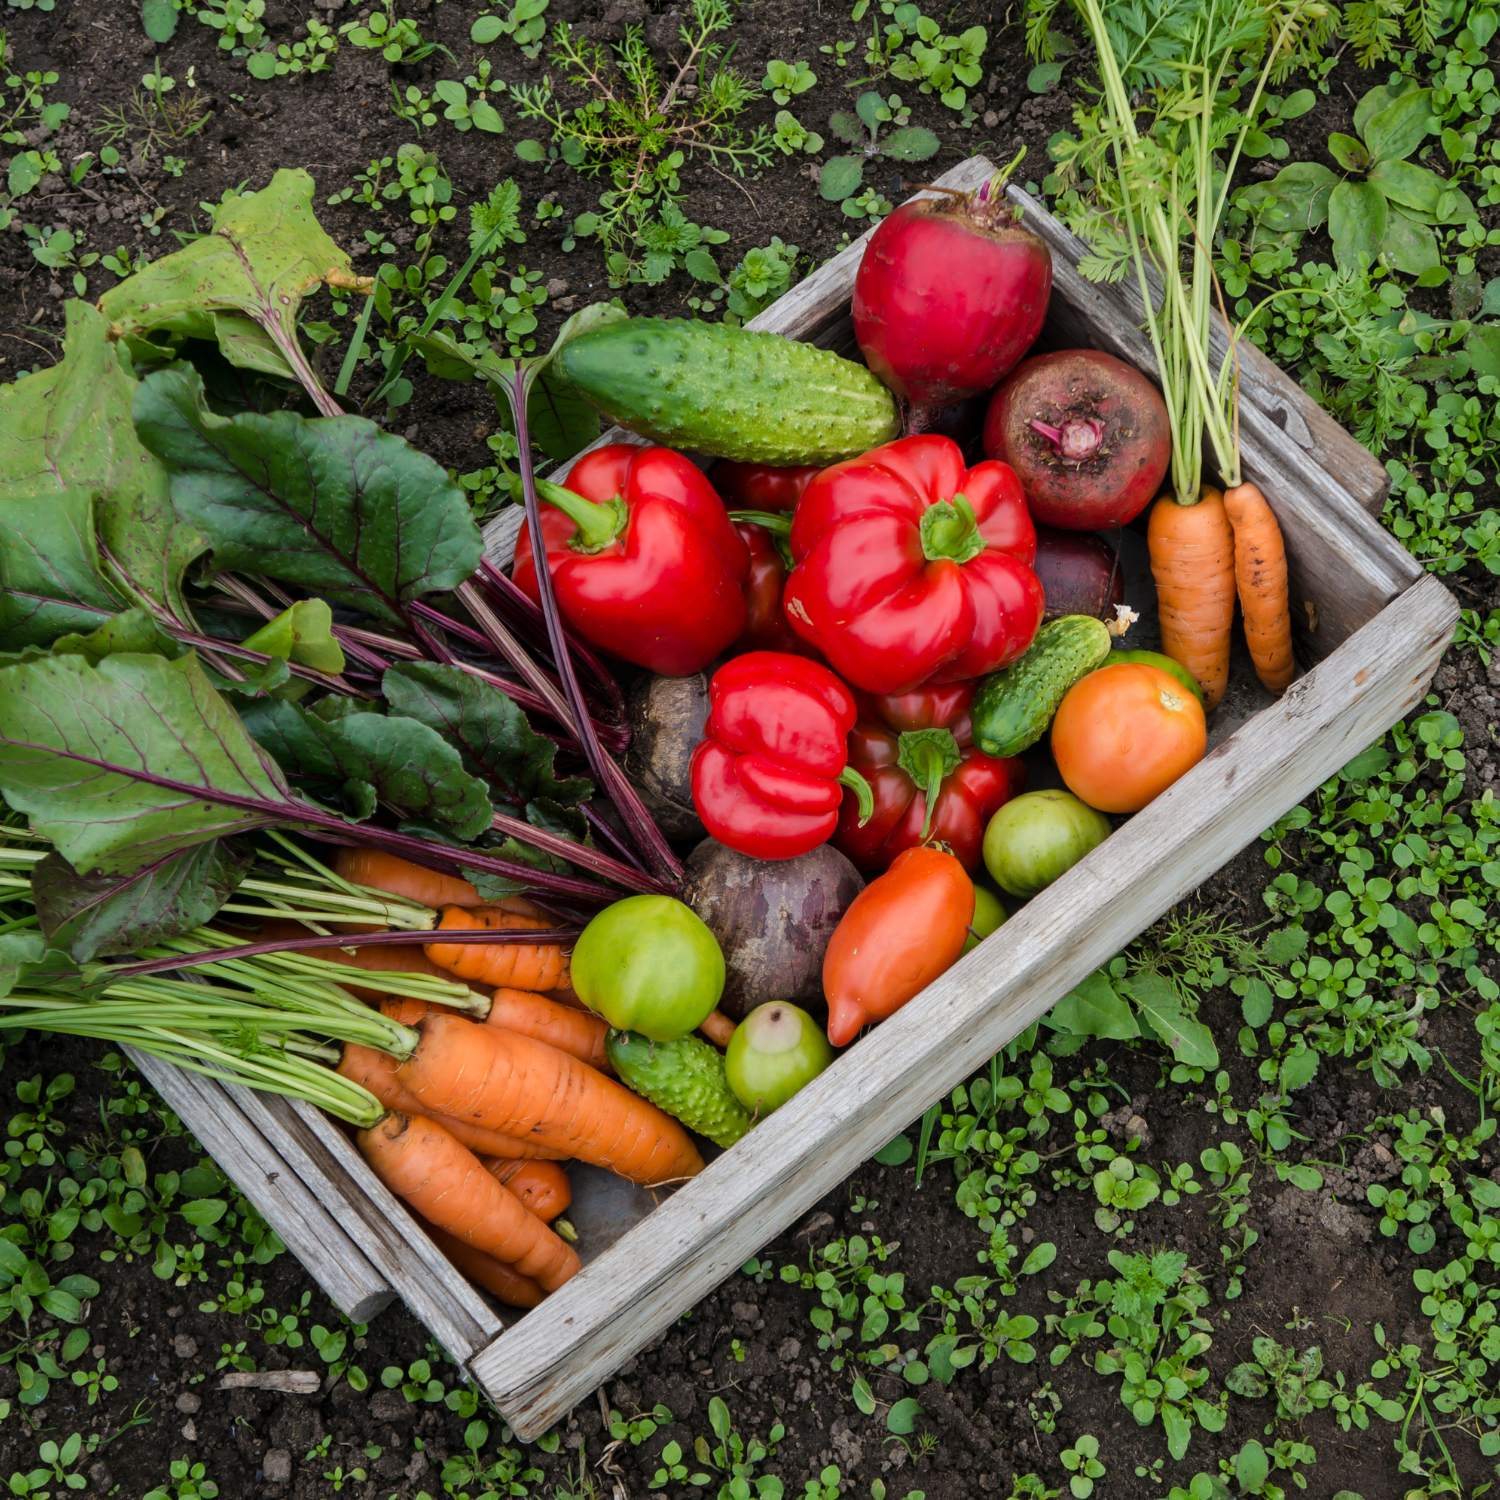 A bountiful wooden crate brimming with a colorful assortment of fresh vegetables harvested from a garden.